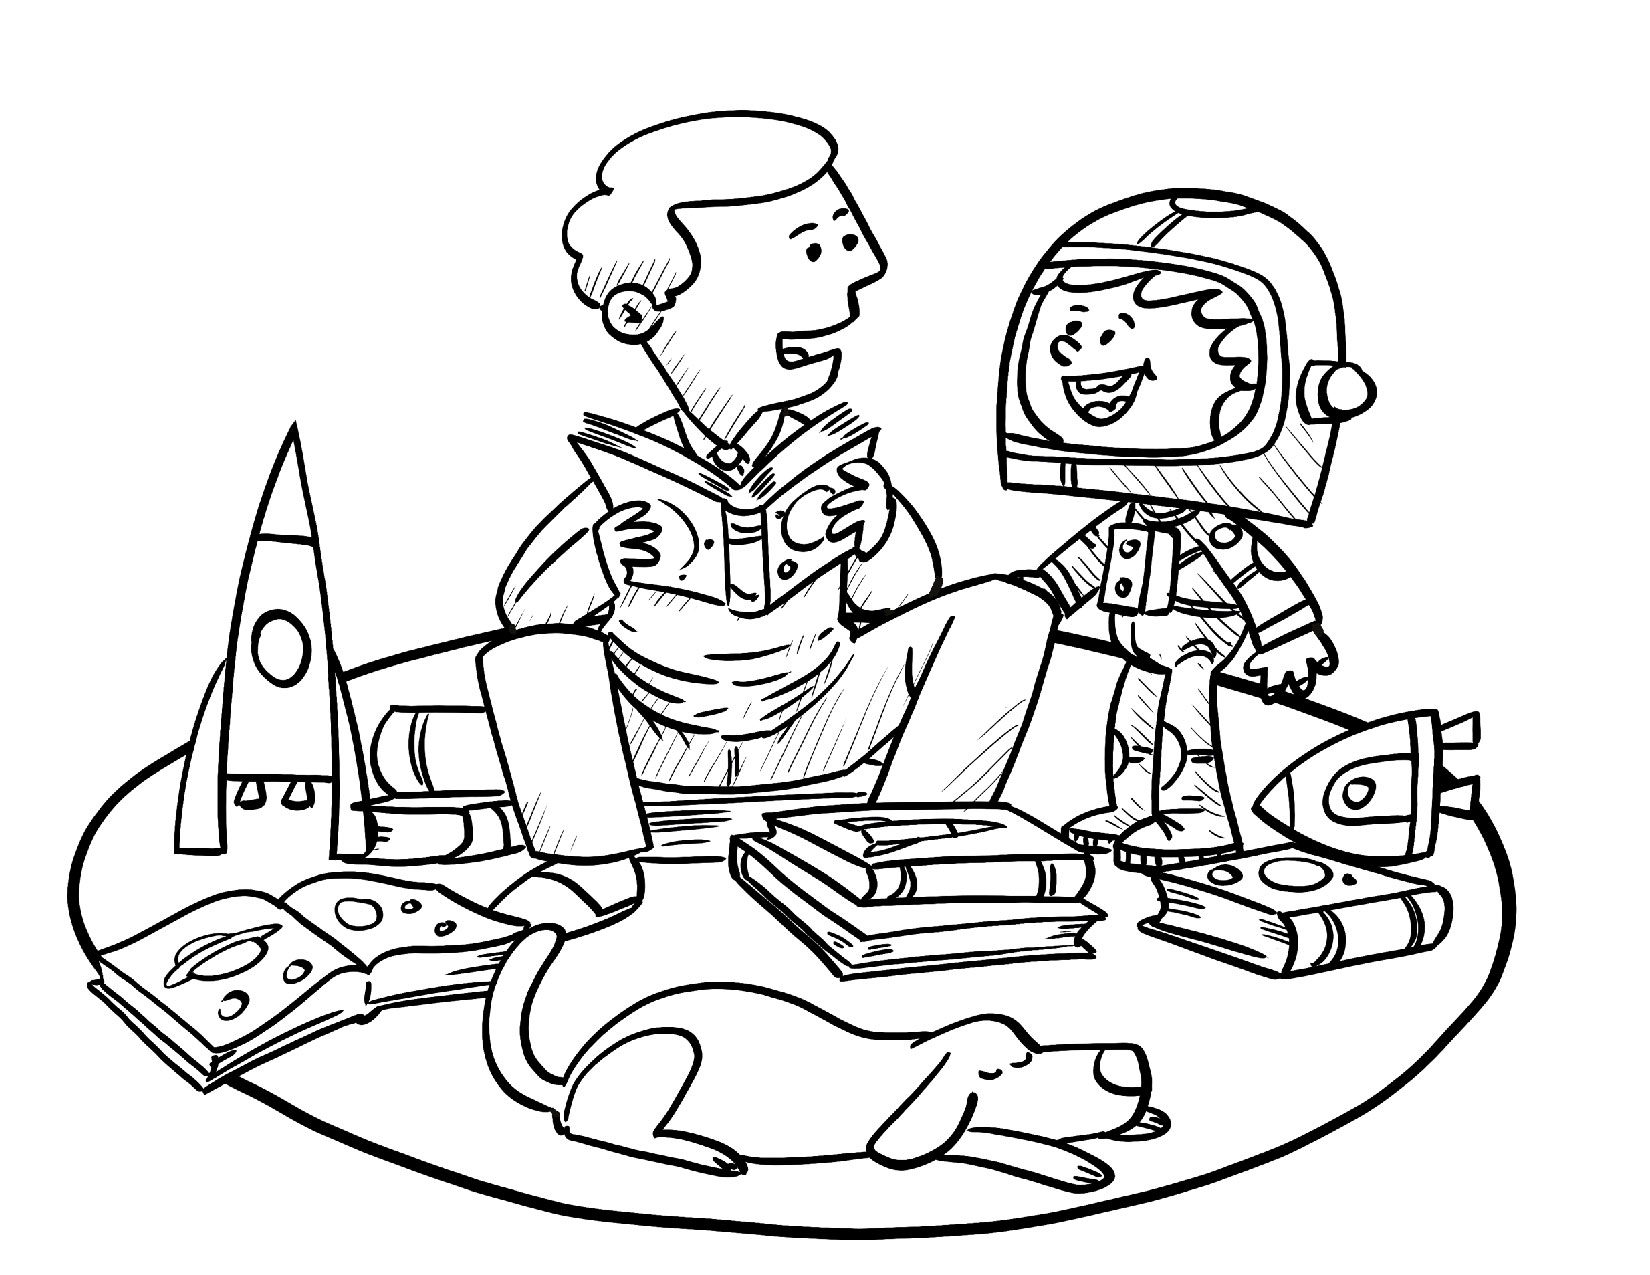 Coloring page of kid in a space suit surrounded by books and rocket models, reading with dad